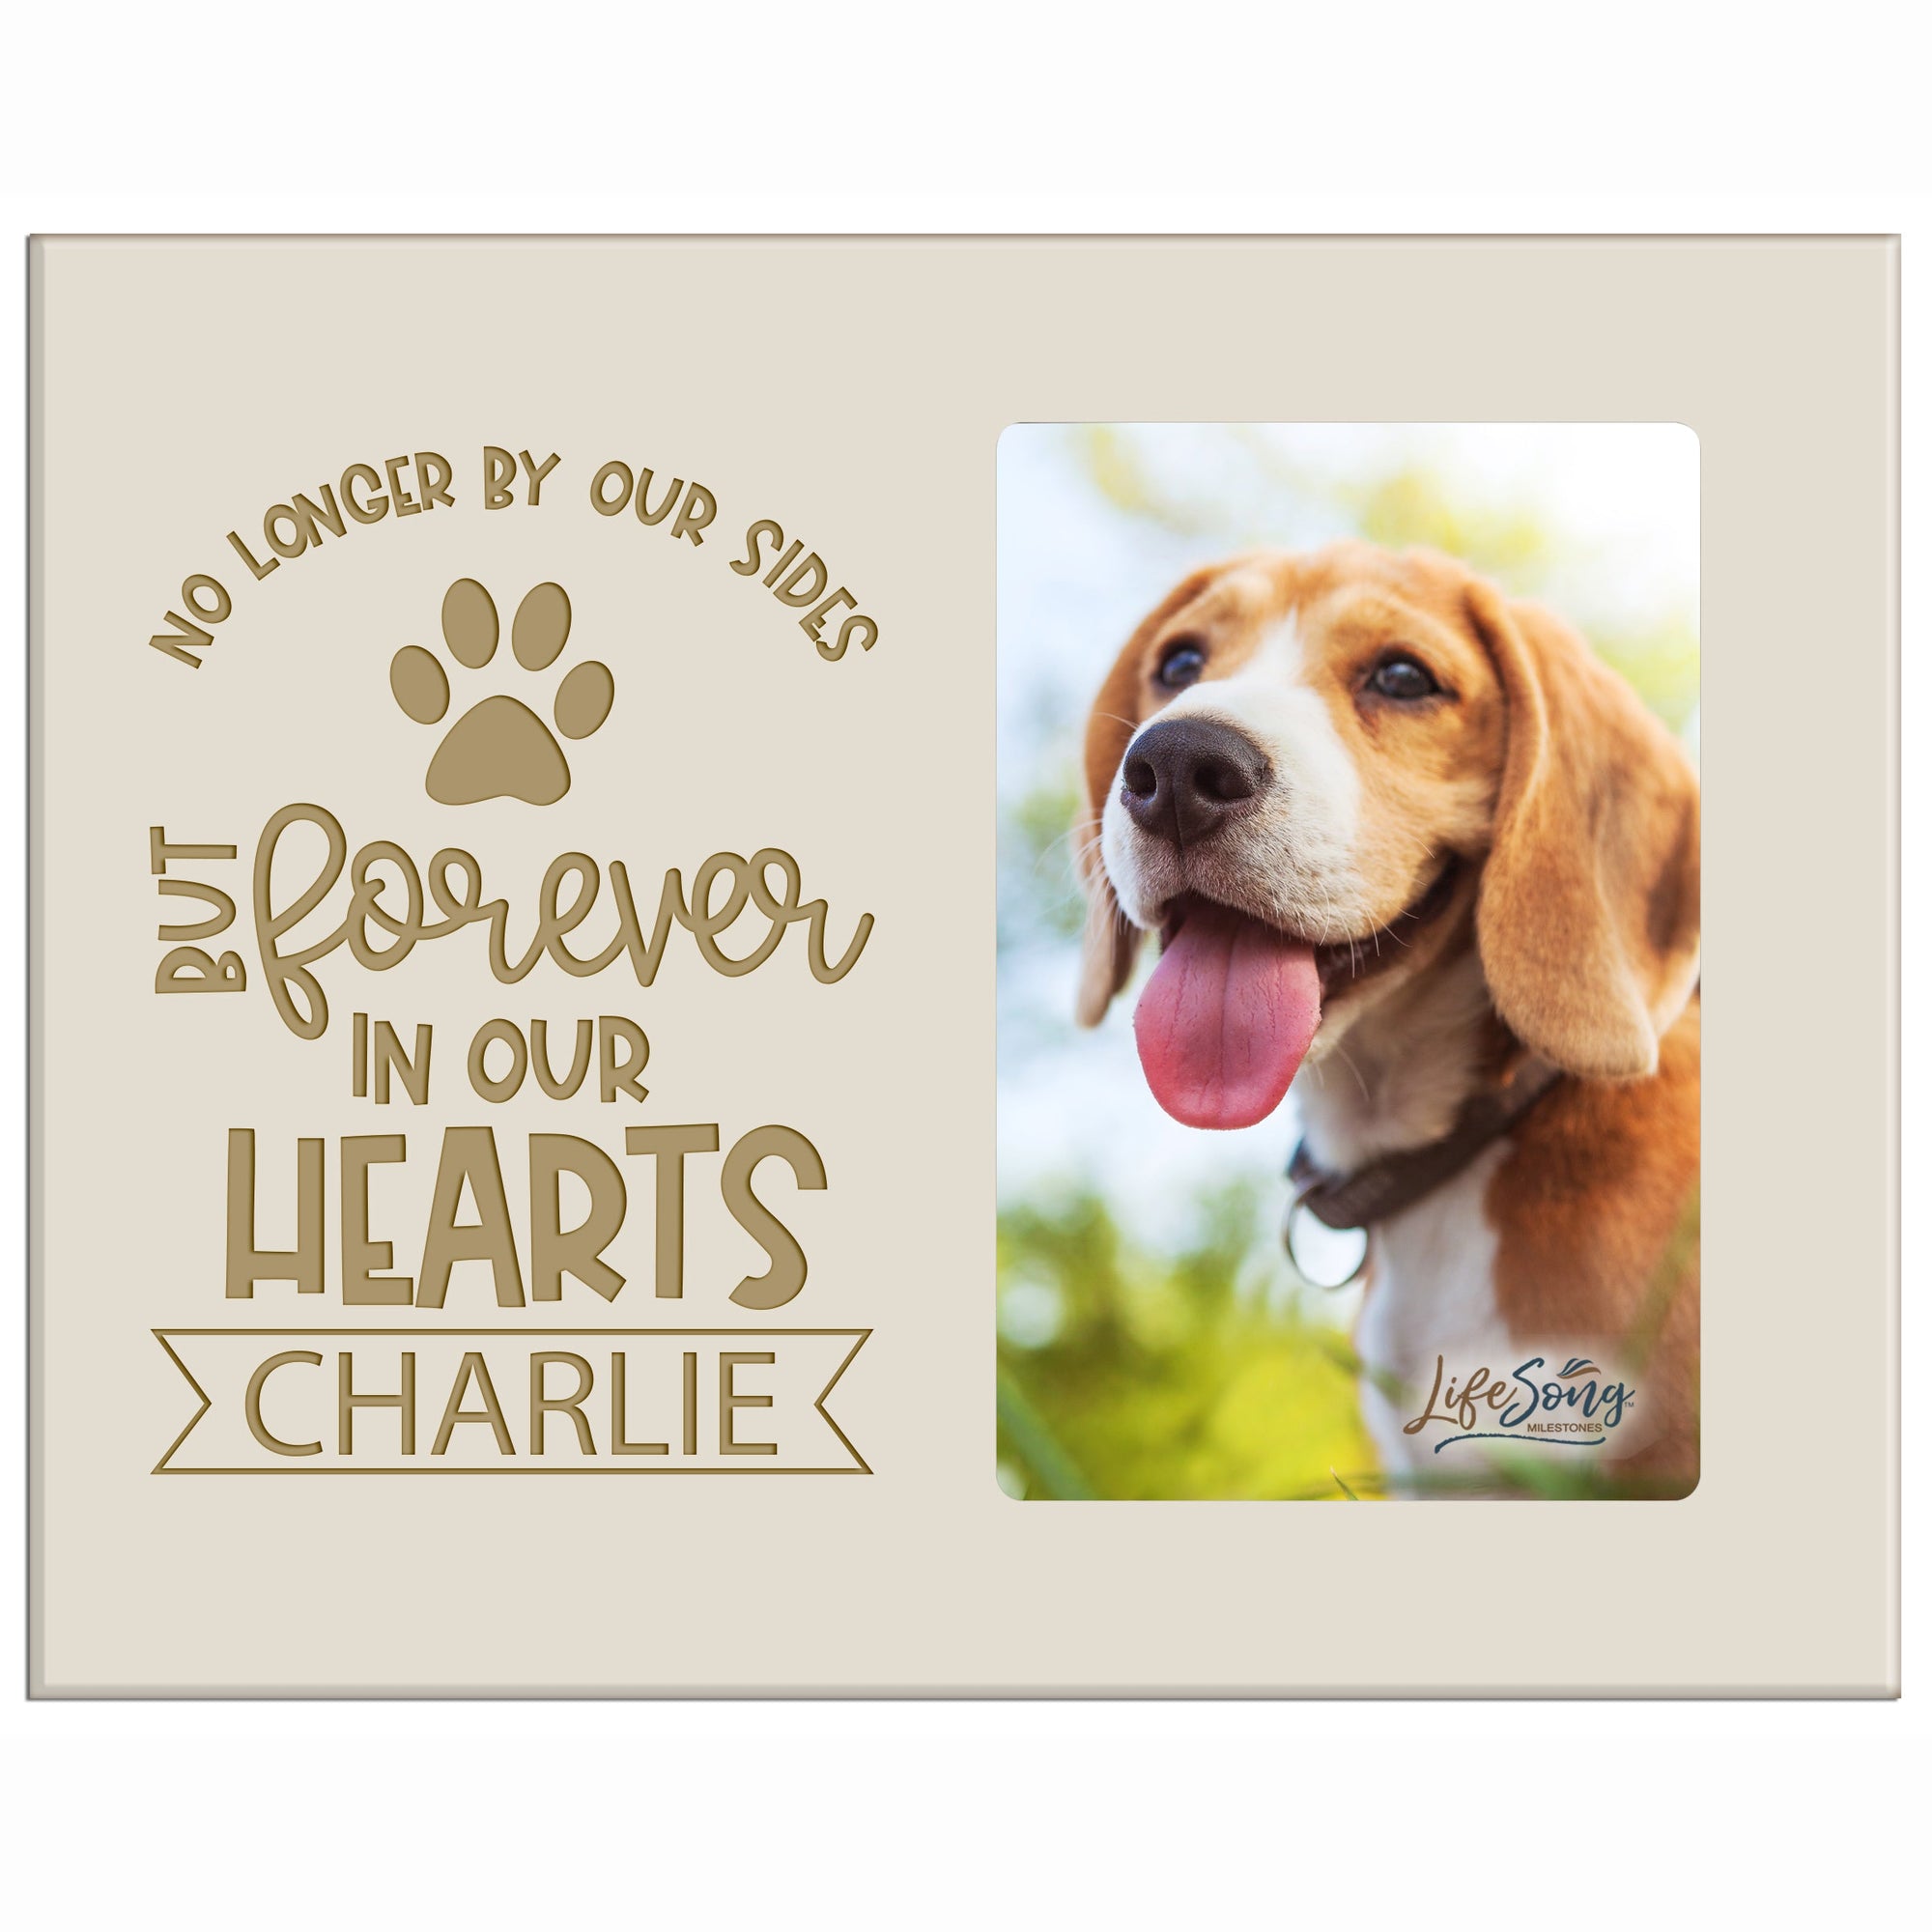 8x10 Ivory Pet Memorial Picture Frame with the phrase "No Longer By Our Sides But Forever In Our Hearts"